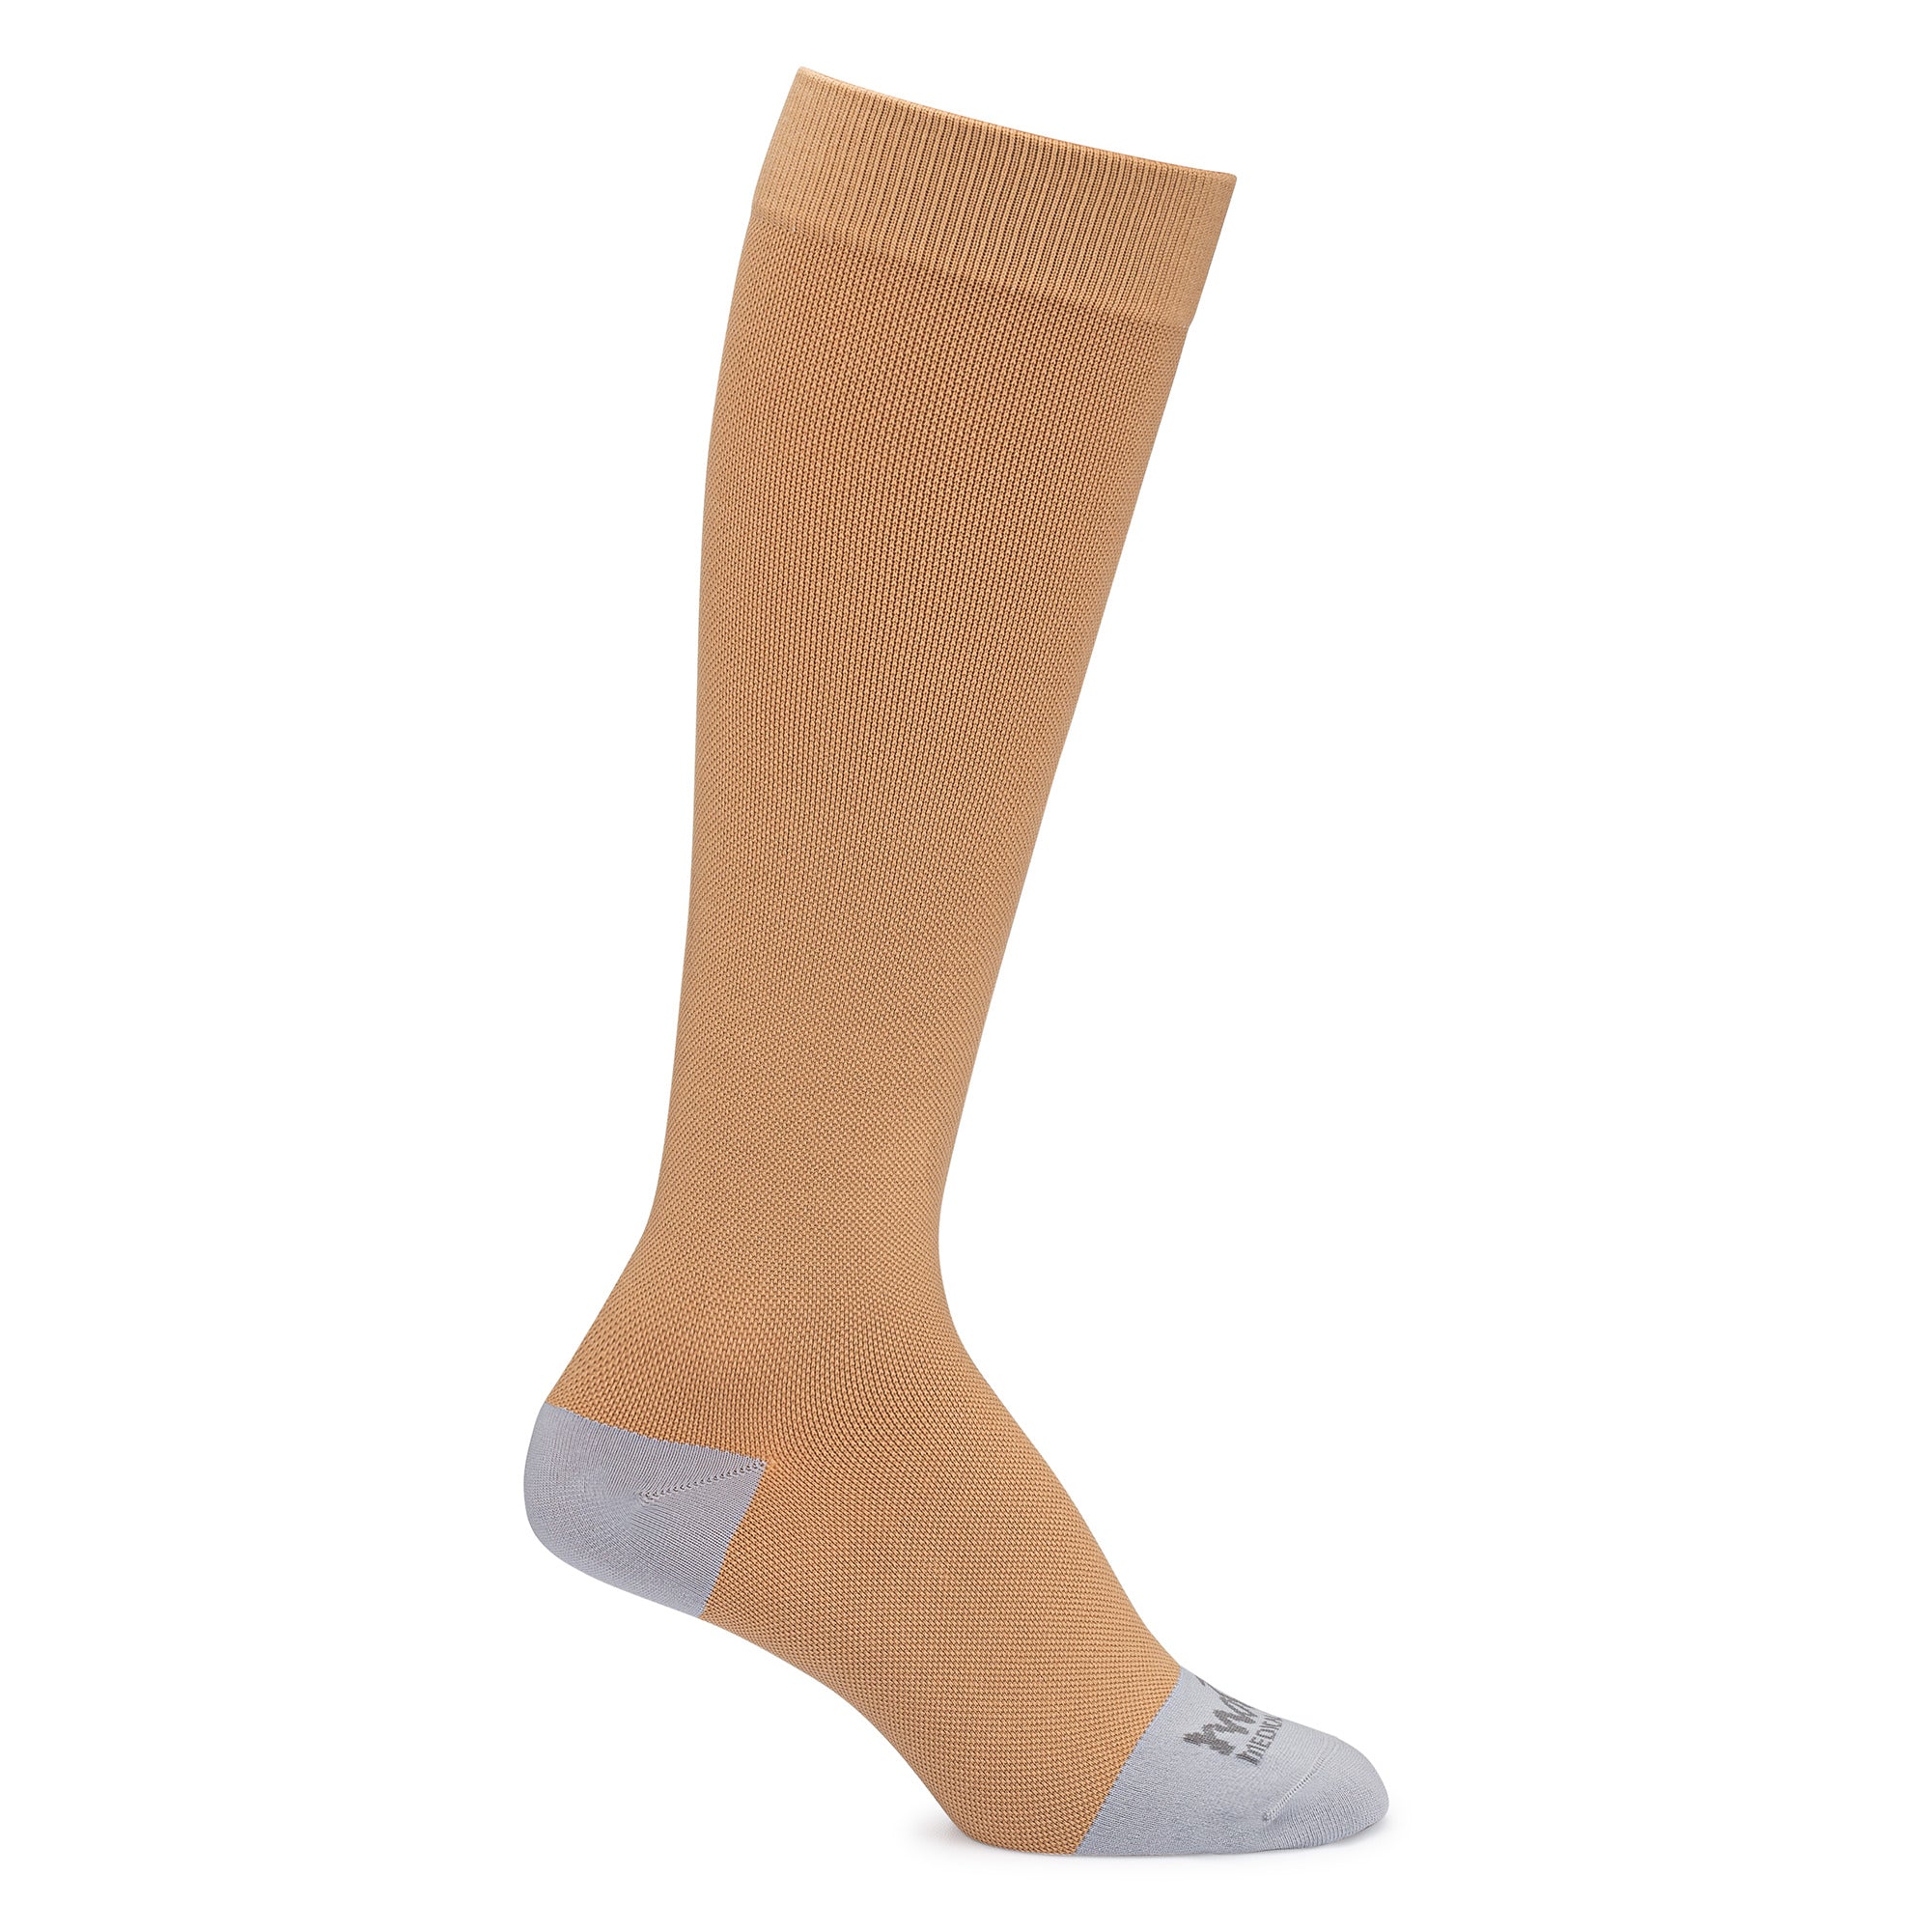 Beige tall sock with grey toe and heel caps-Motif Medical Gradient Maternity Compression Socks